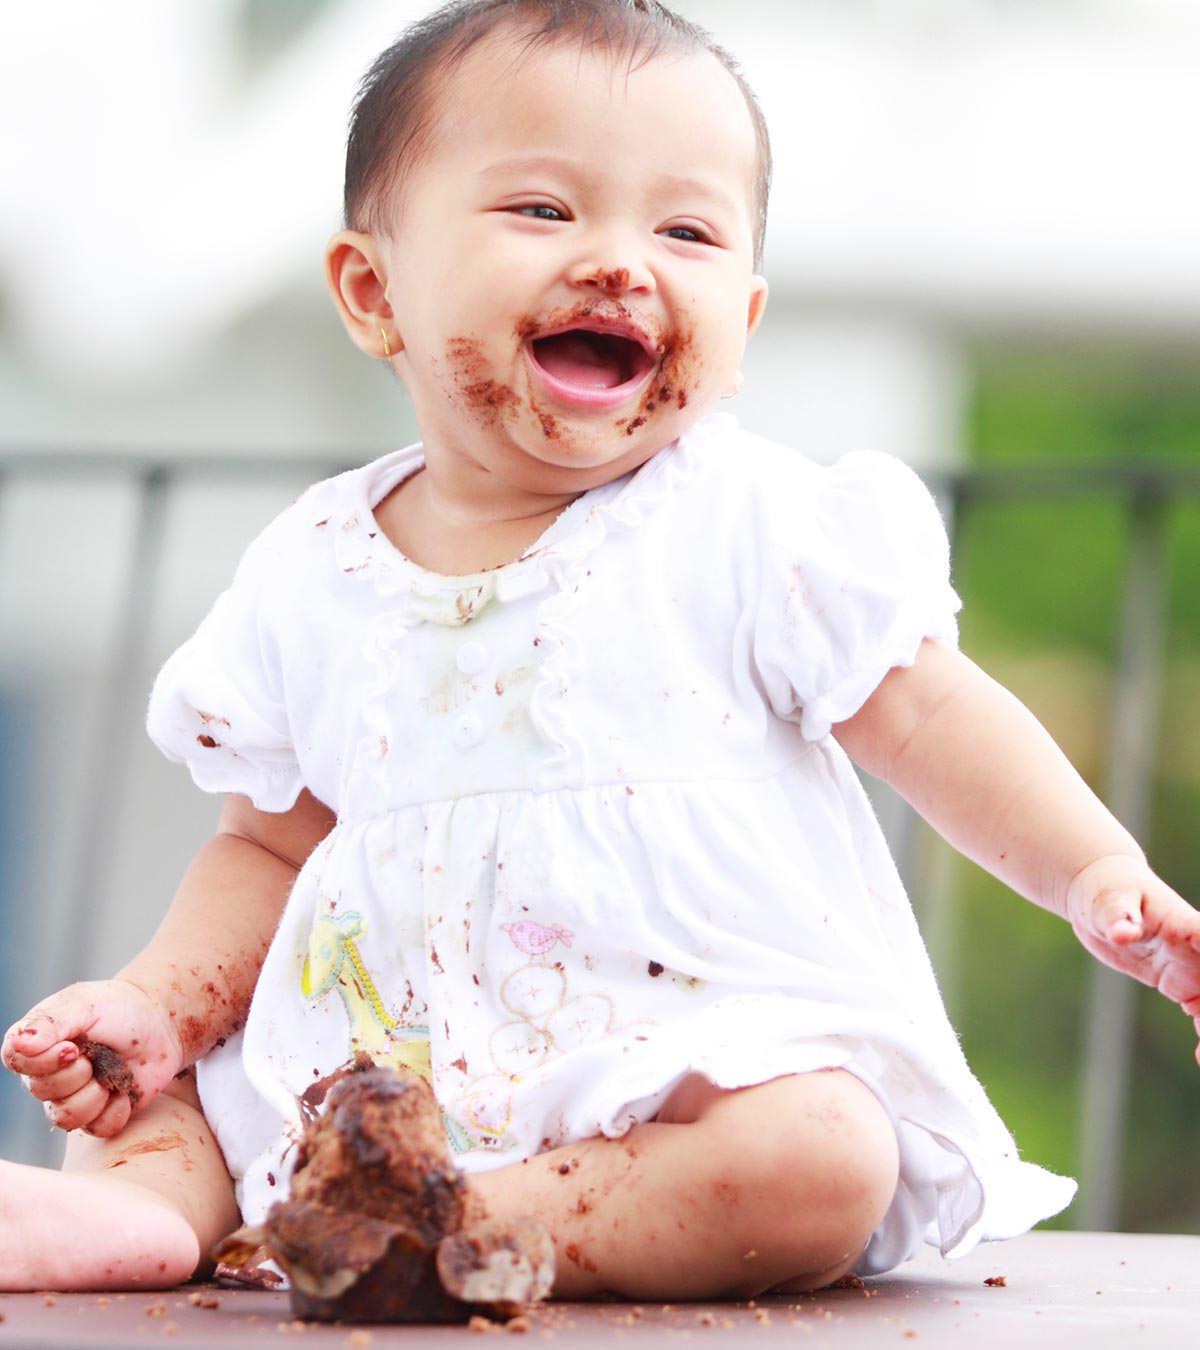 When Can Babies Have Chocolate And Does It Cause Any Problems?